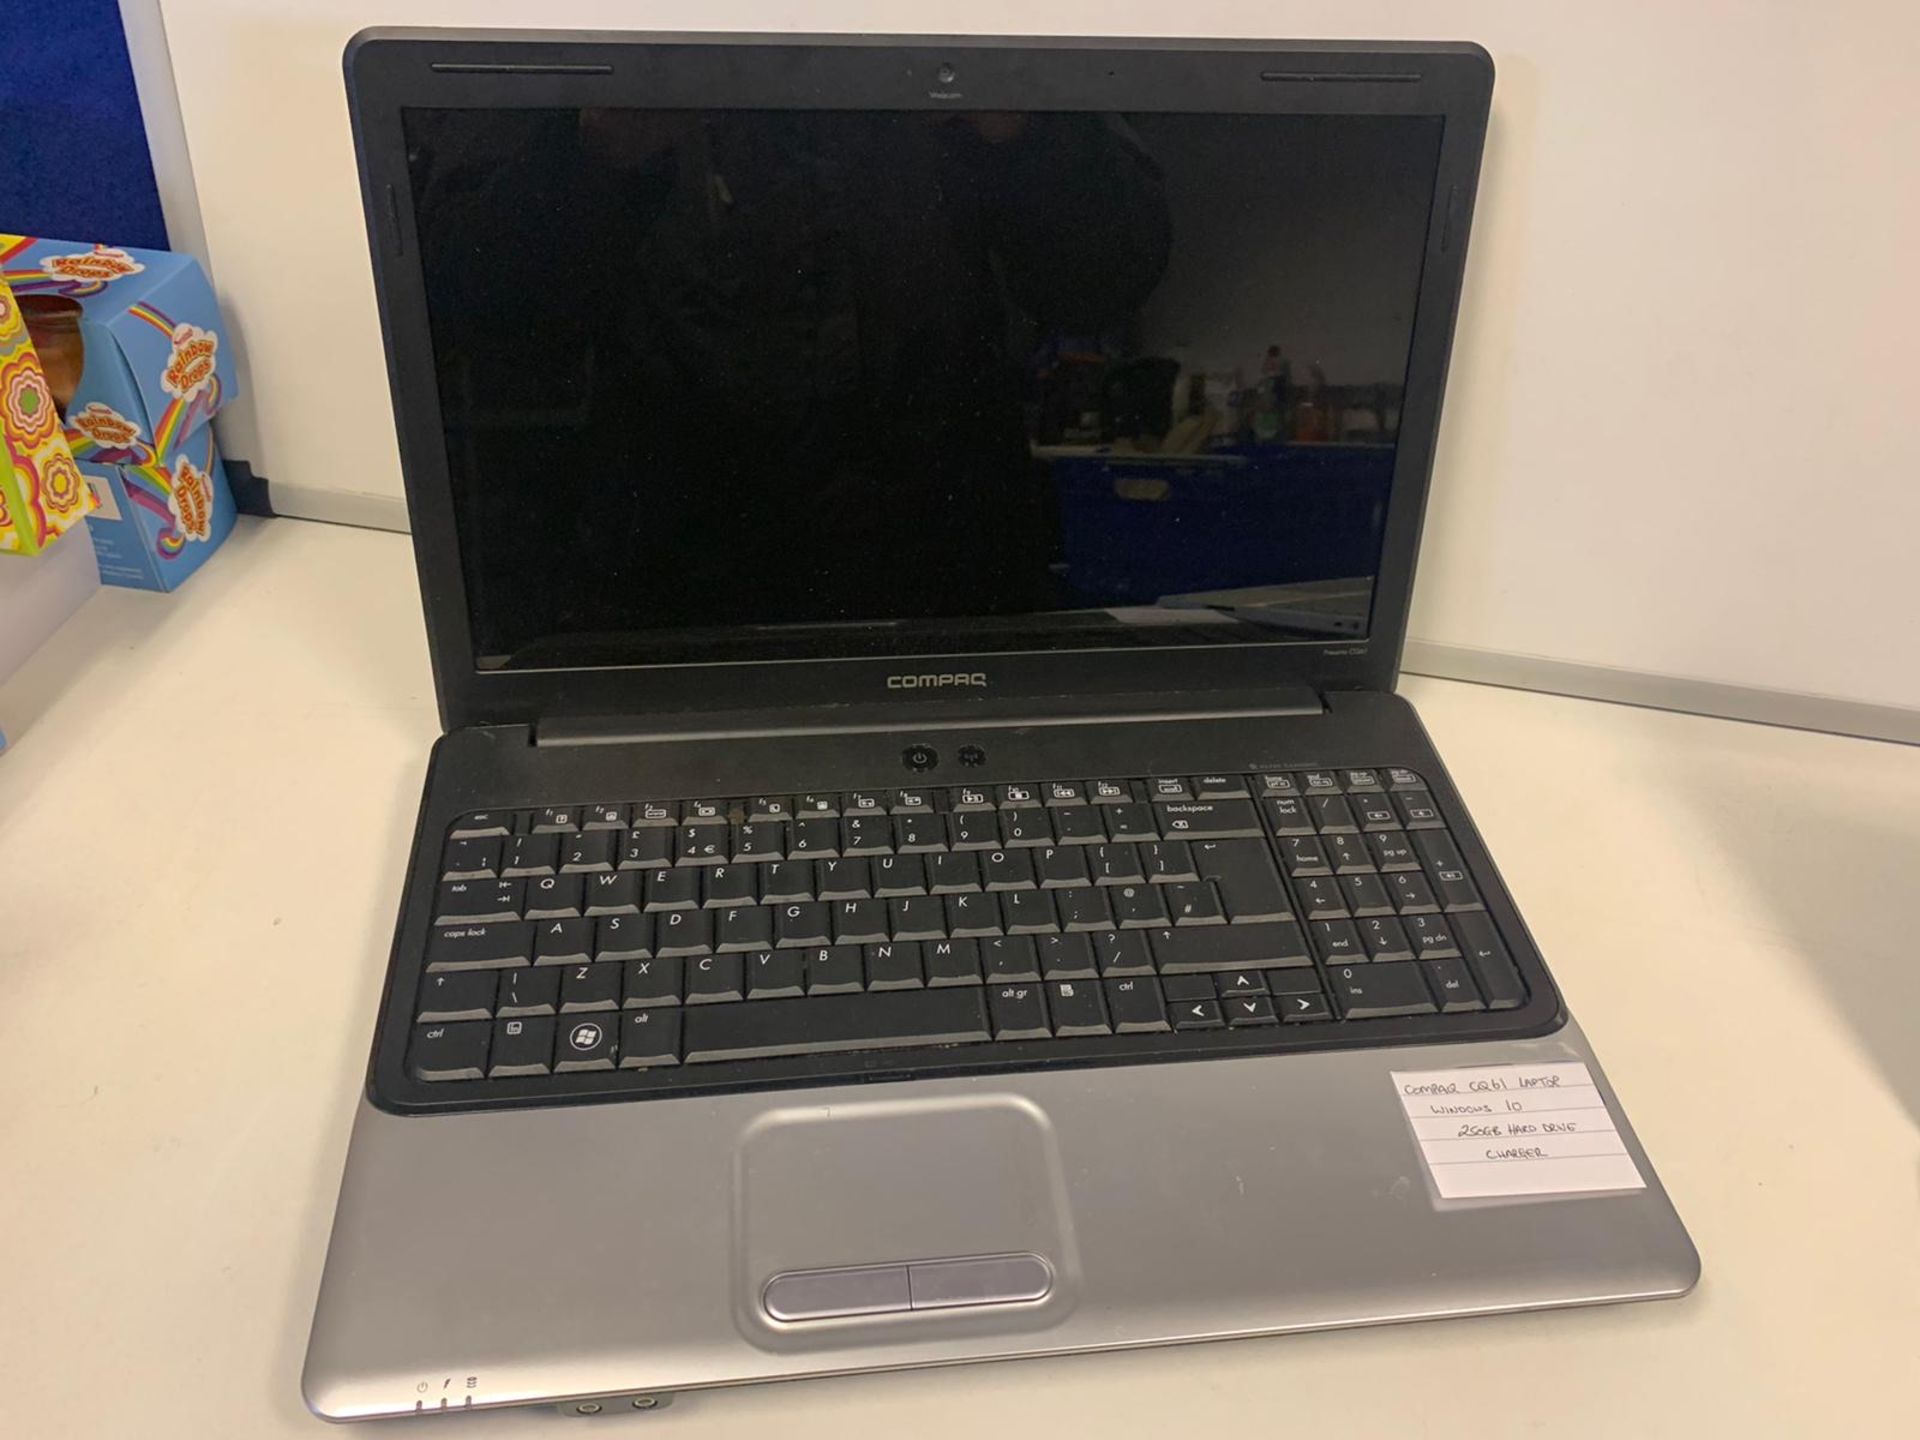 COMPAQ C161 LAPTOP WINDOWS 10 250GB HARD DRIVE WITH CHARGER